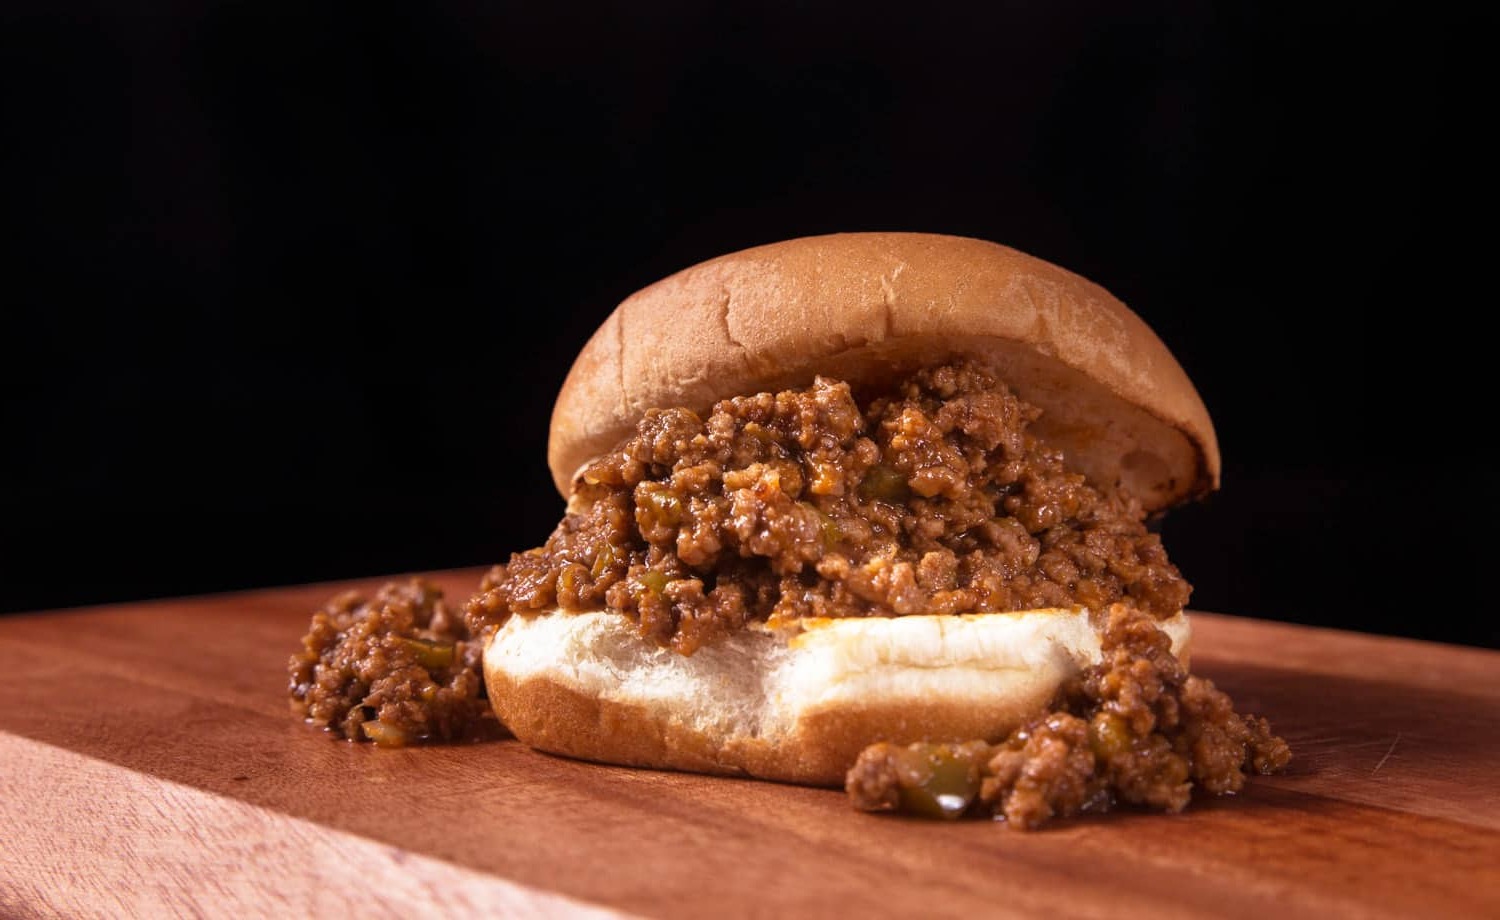 How to Make Sloppy Joes in the Pressure Cooker